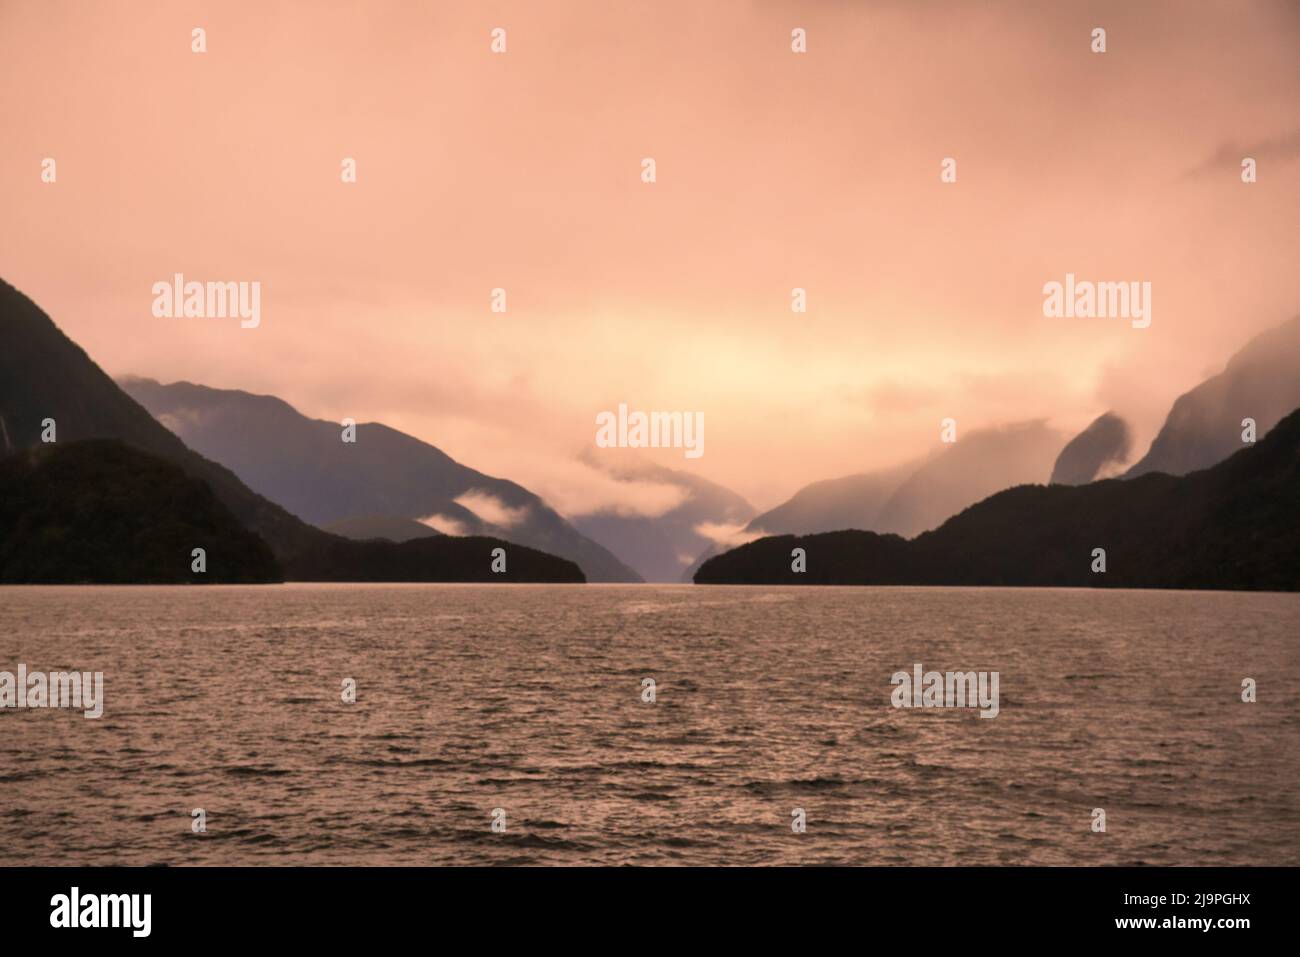 The mountains silhouetted in the murky atmosphere on a bad weather day in the fjord Stock Photo